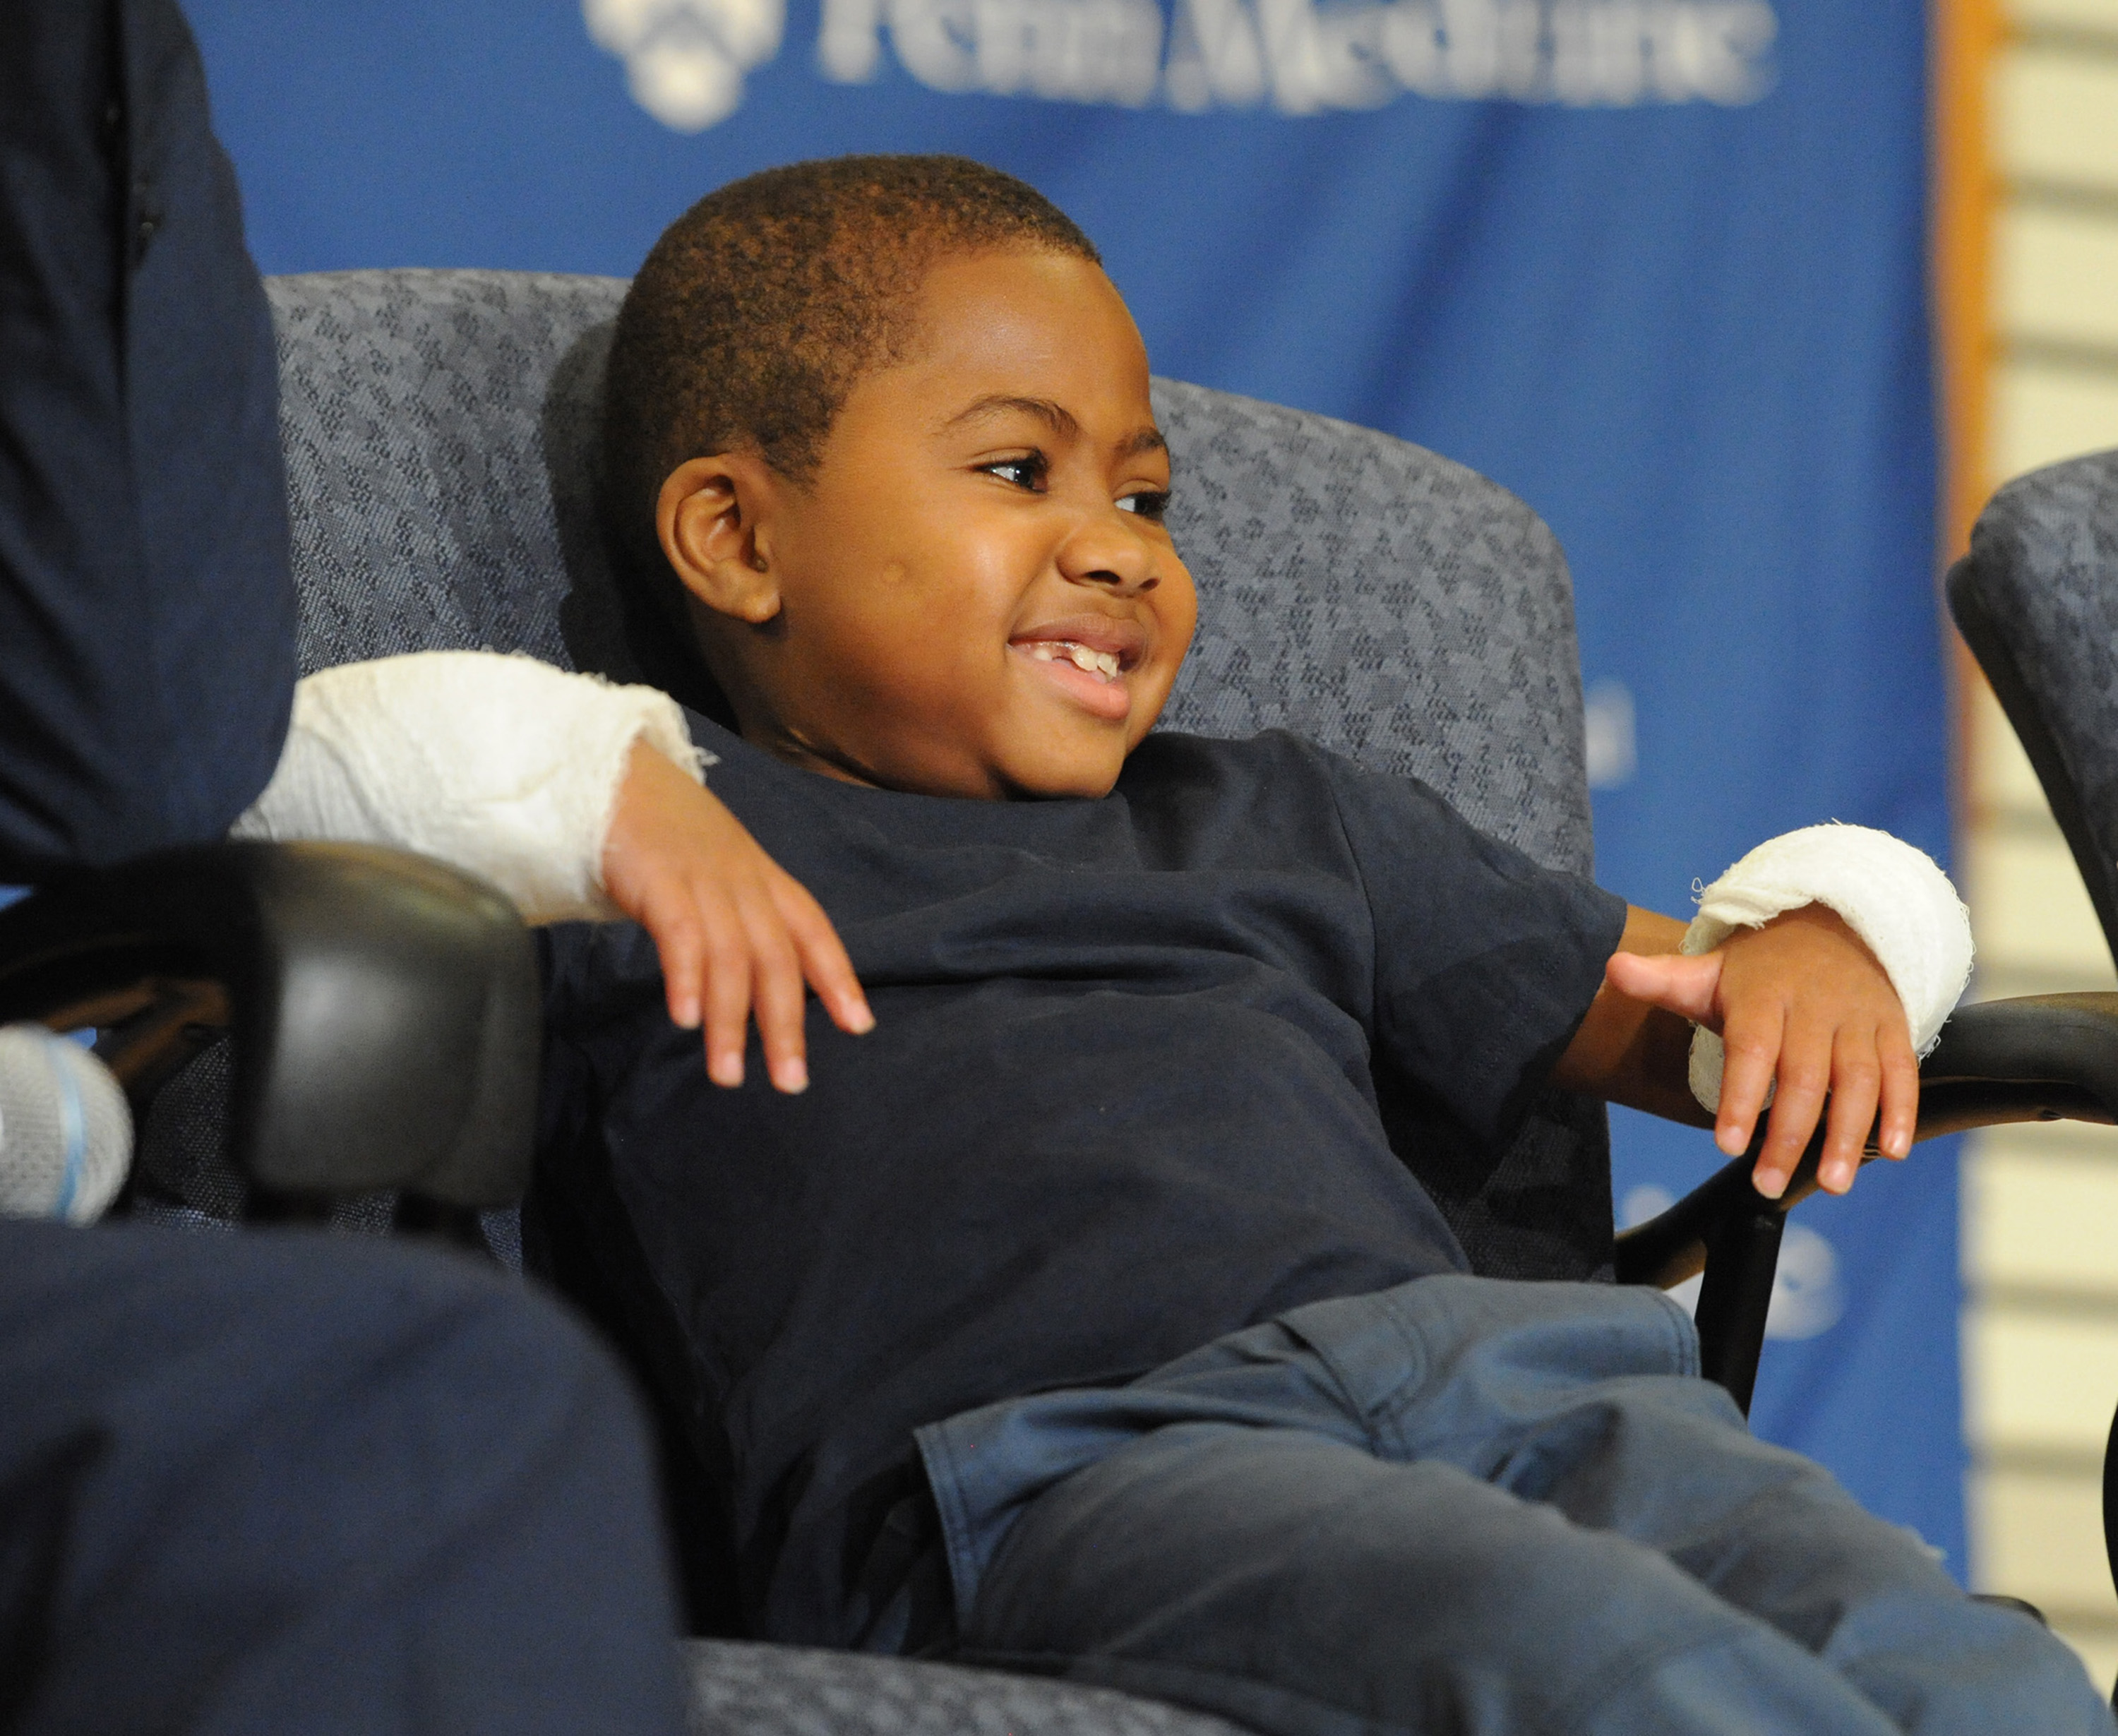 8-year-old Baltimore boy the worldâs first pediatric double-hand transplant recipient